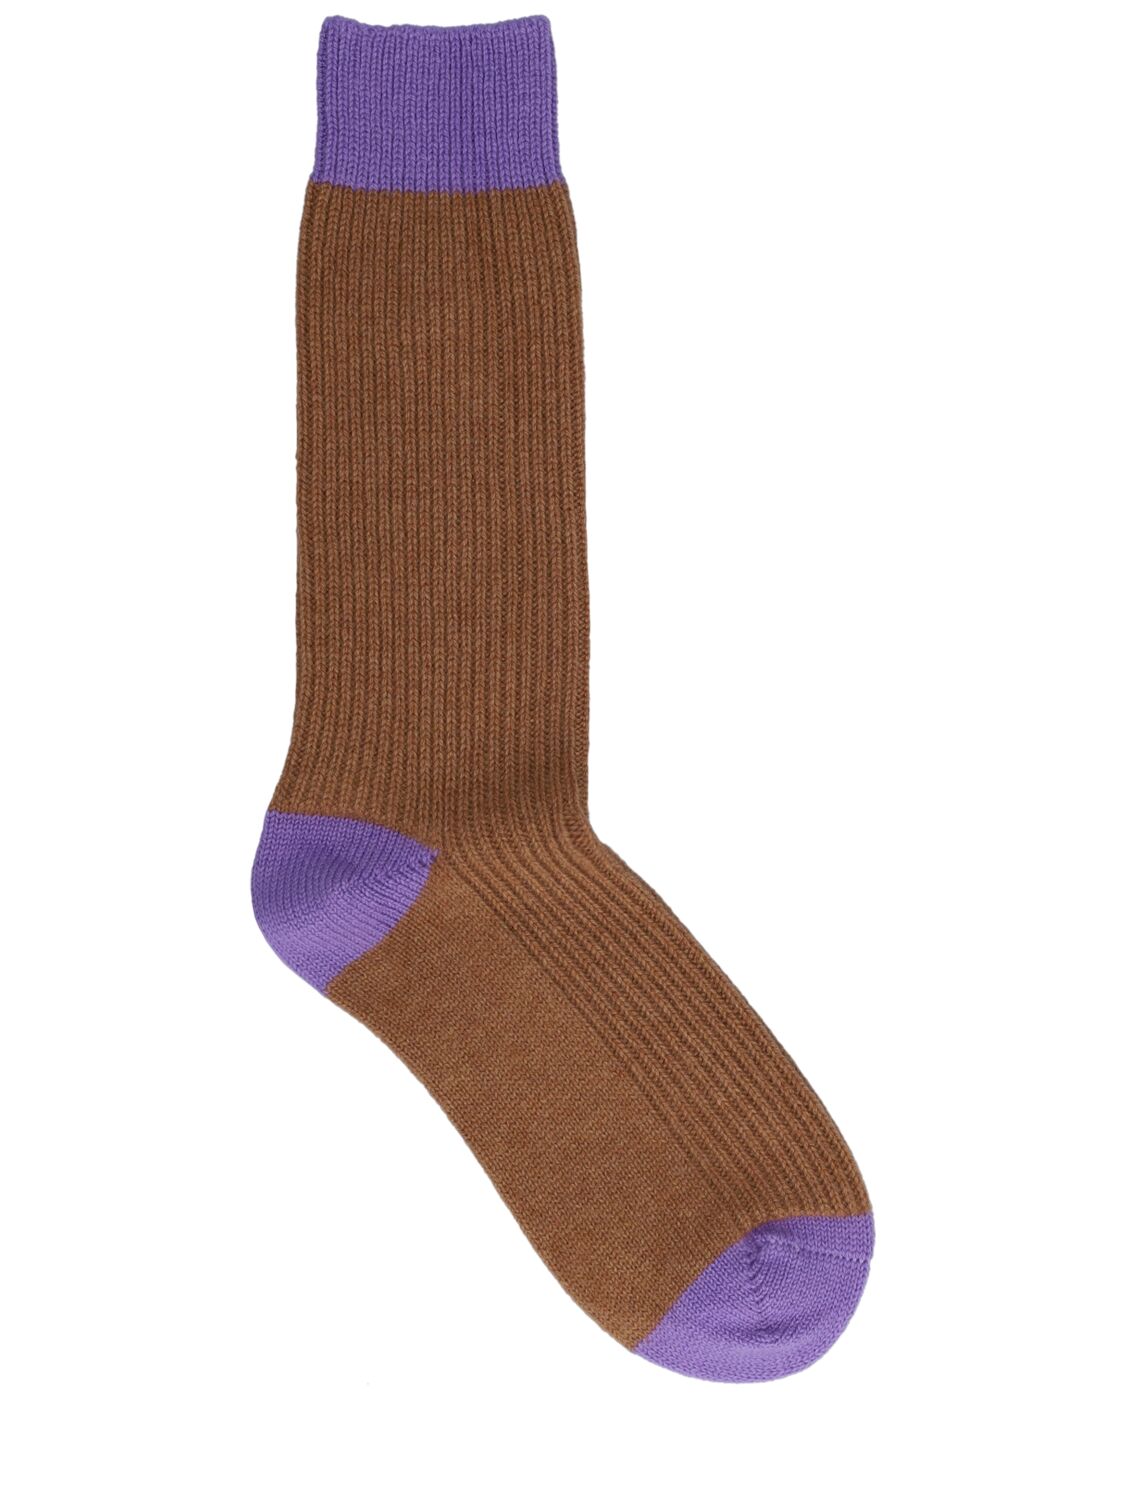 Guest In Residence The Soft Socks In Cashmere In Brown,purple